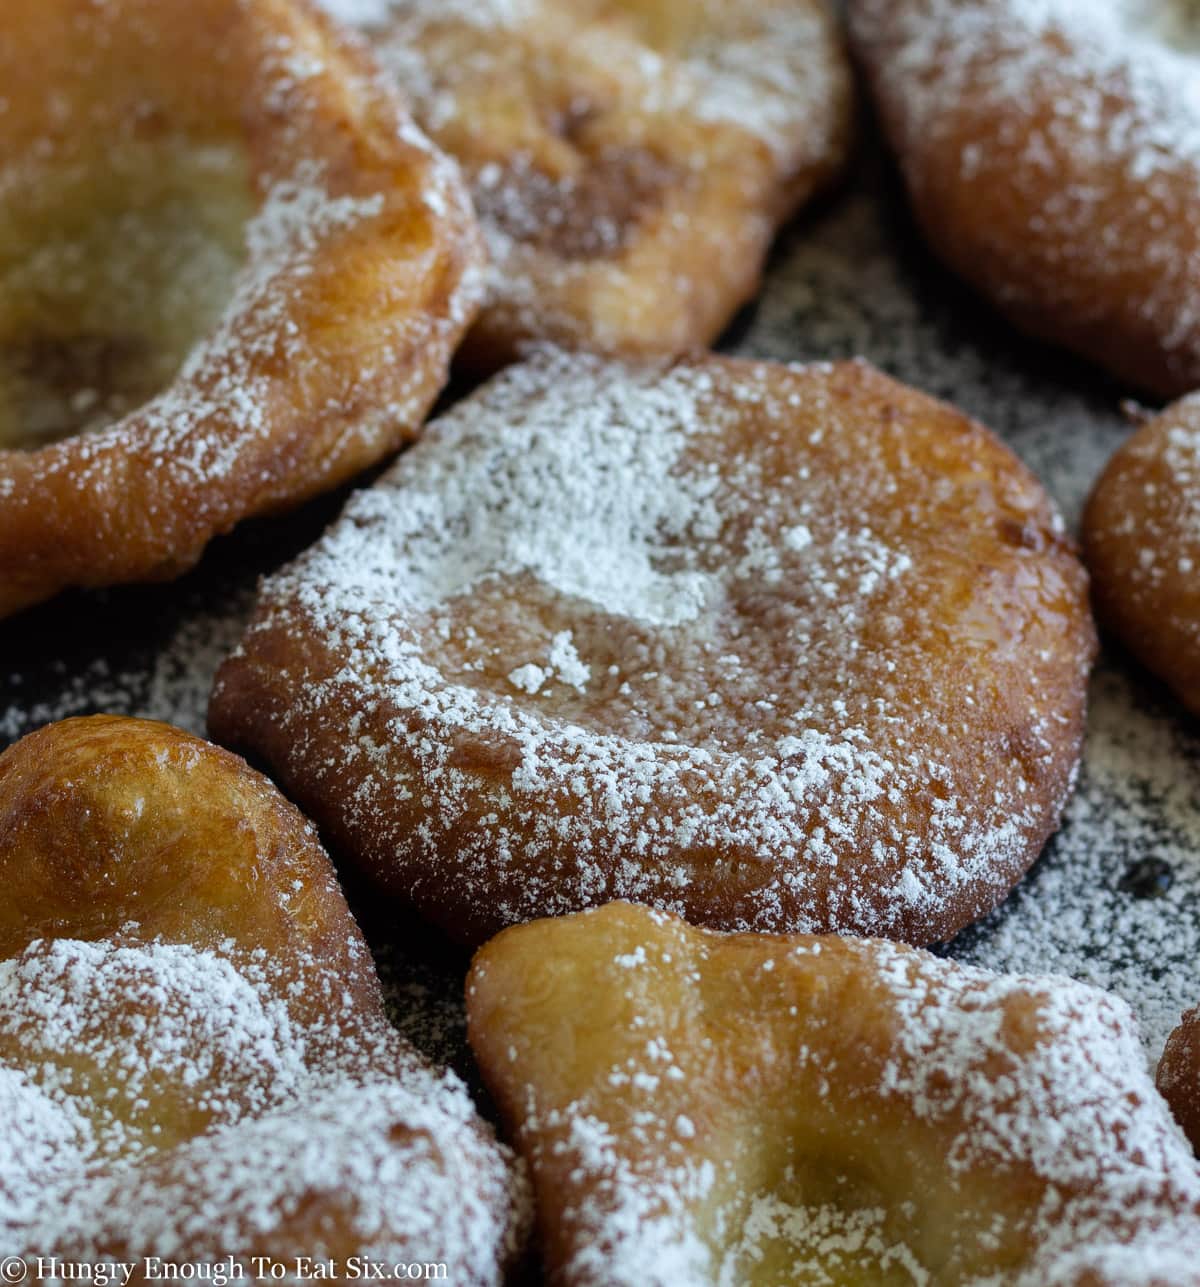 Fried dough with a sprinkle of white powdered sugar